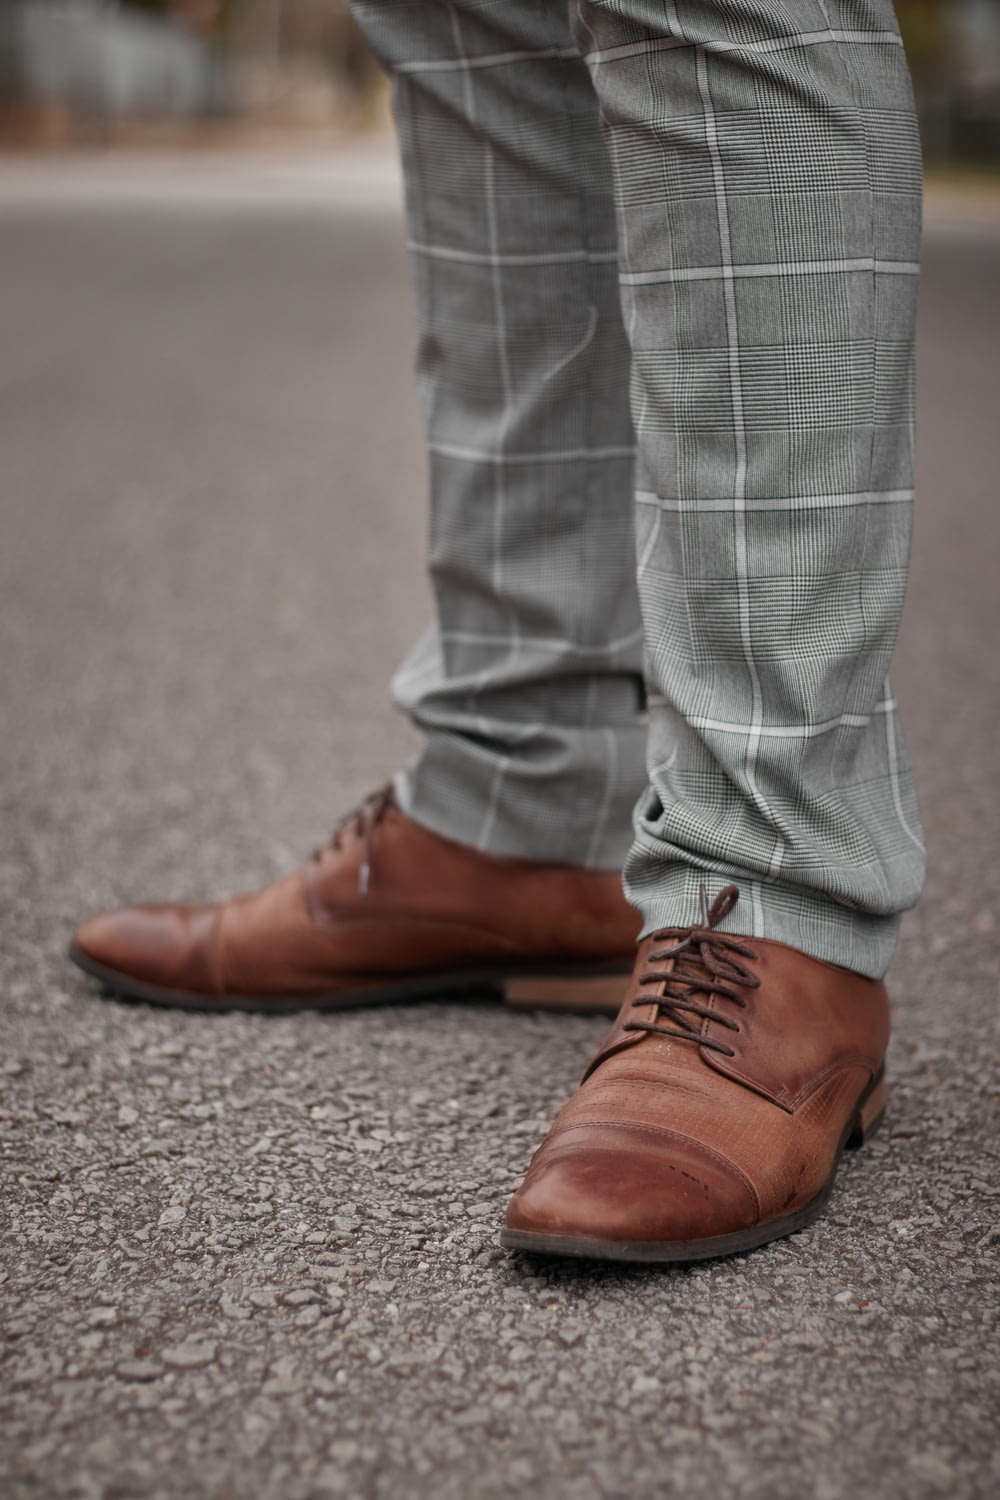 person in gray denim jeans and brown leather shoes